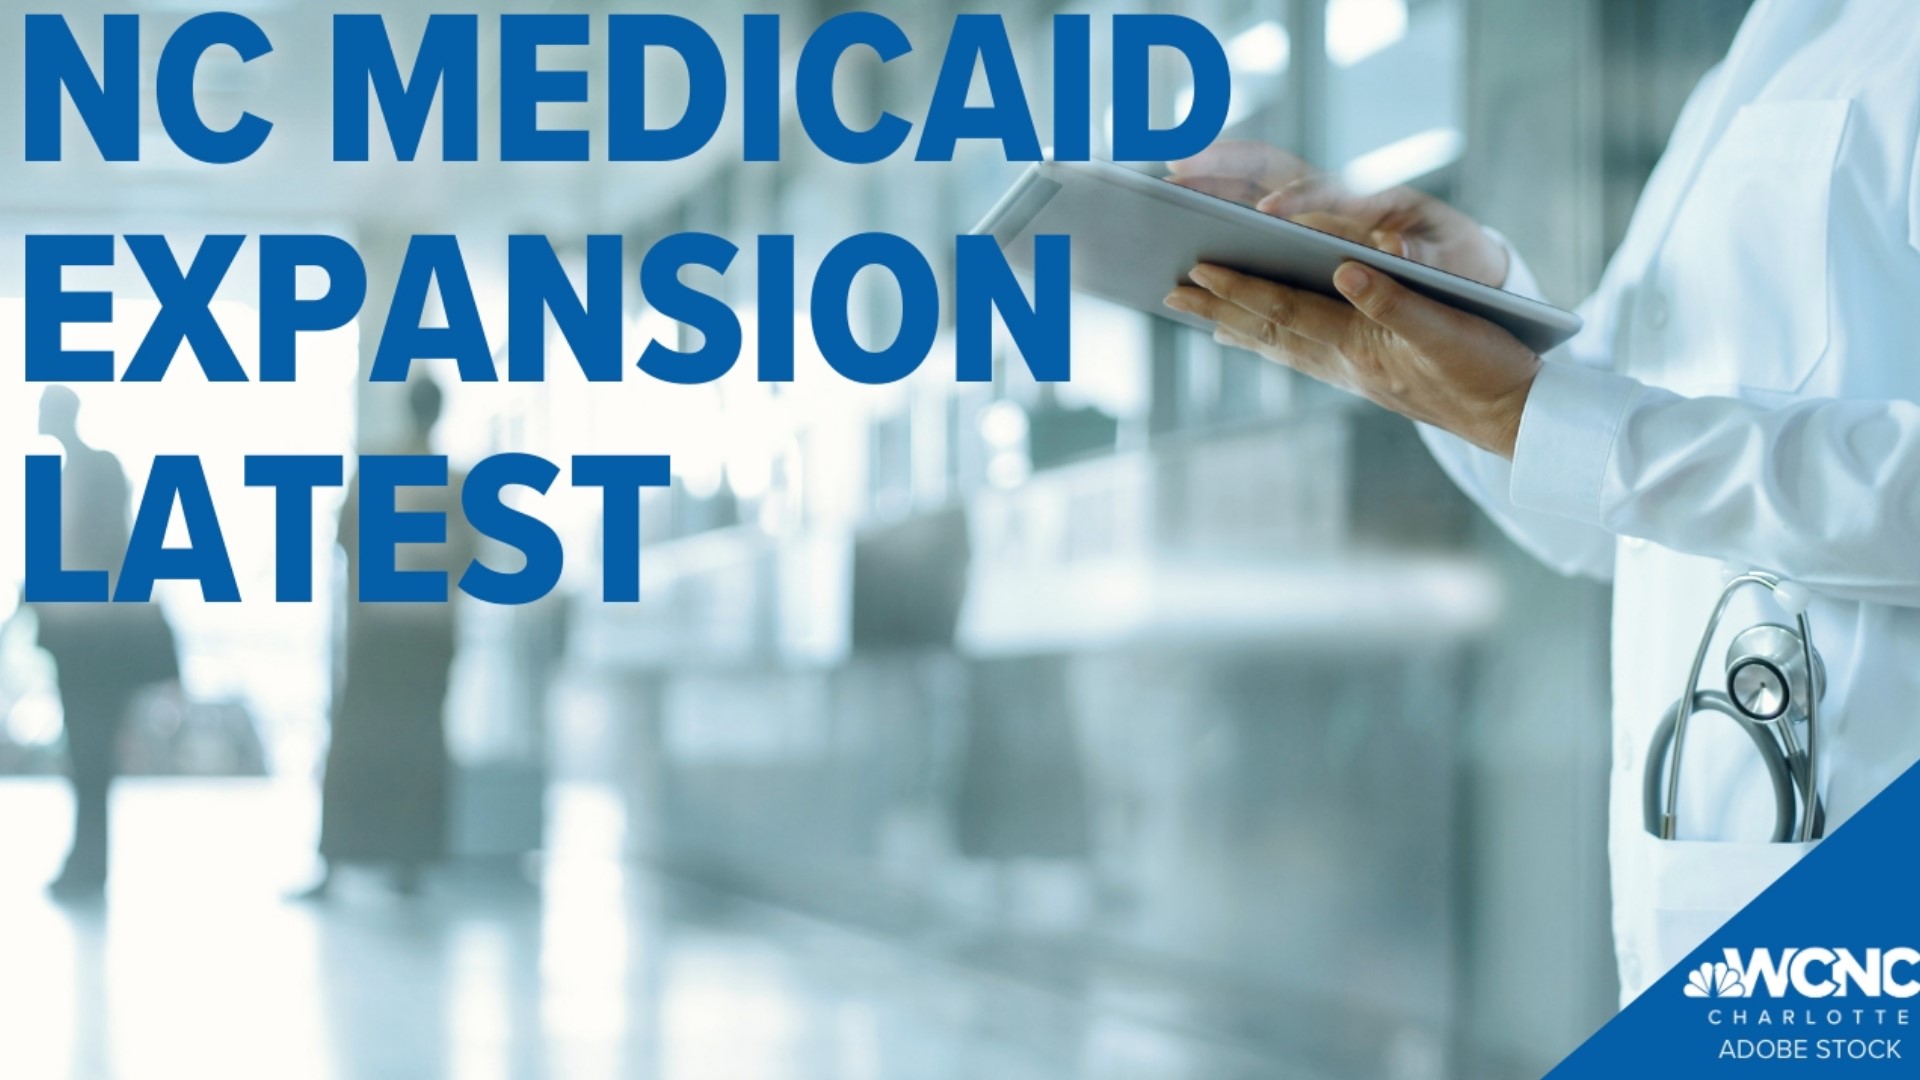 An agreement to expand Medicaid in the state of North Carolina has reached the cusp of final legislative approval following a state House vote.